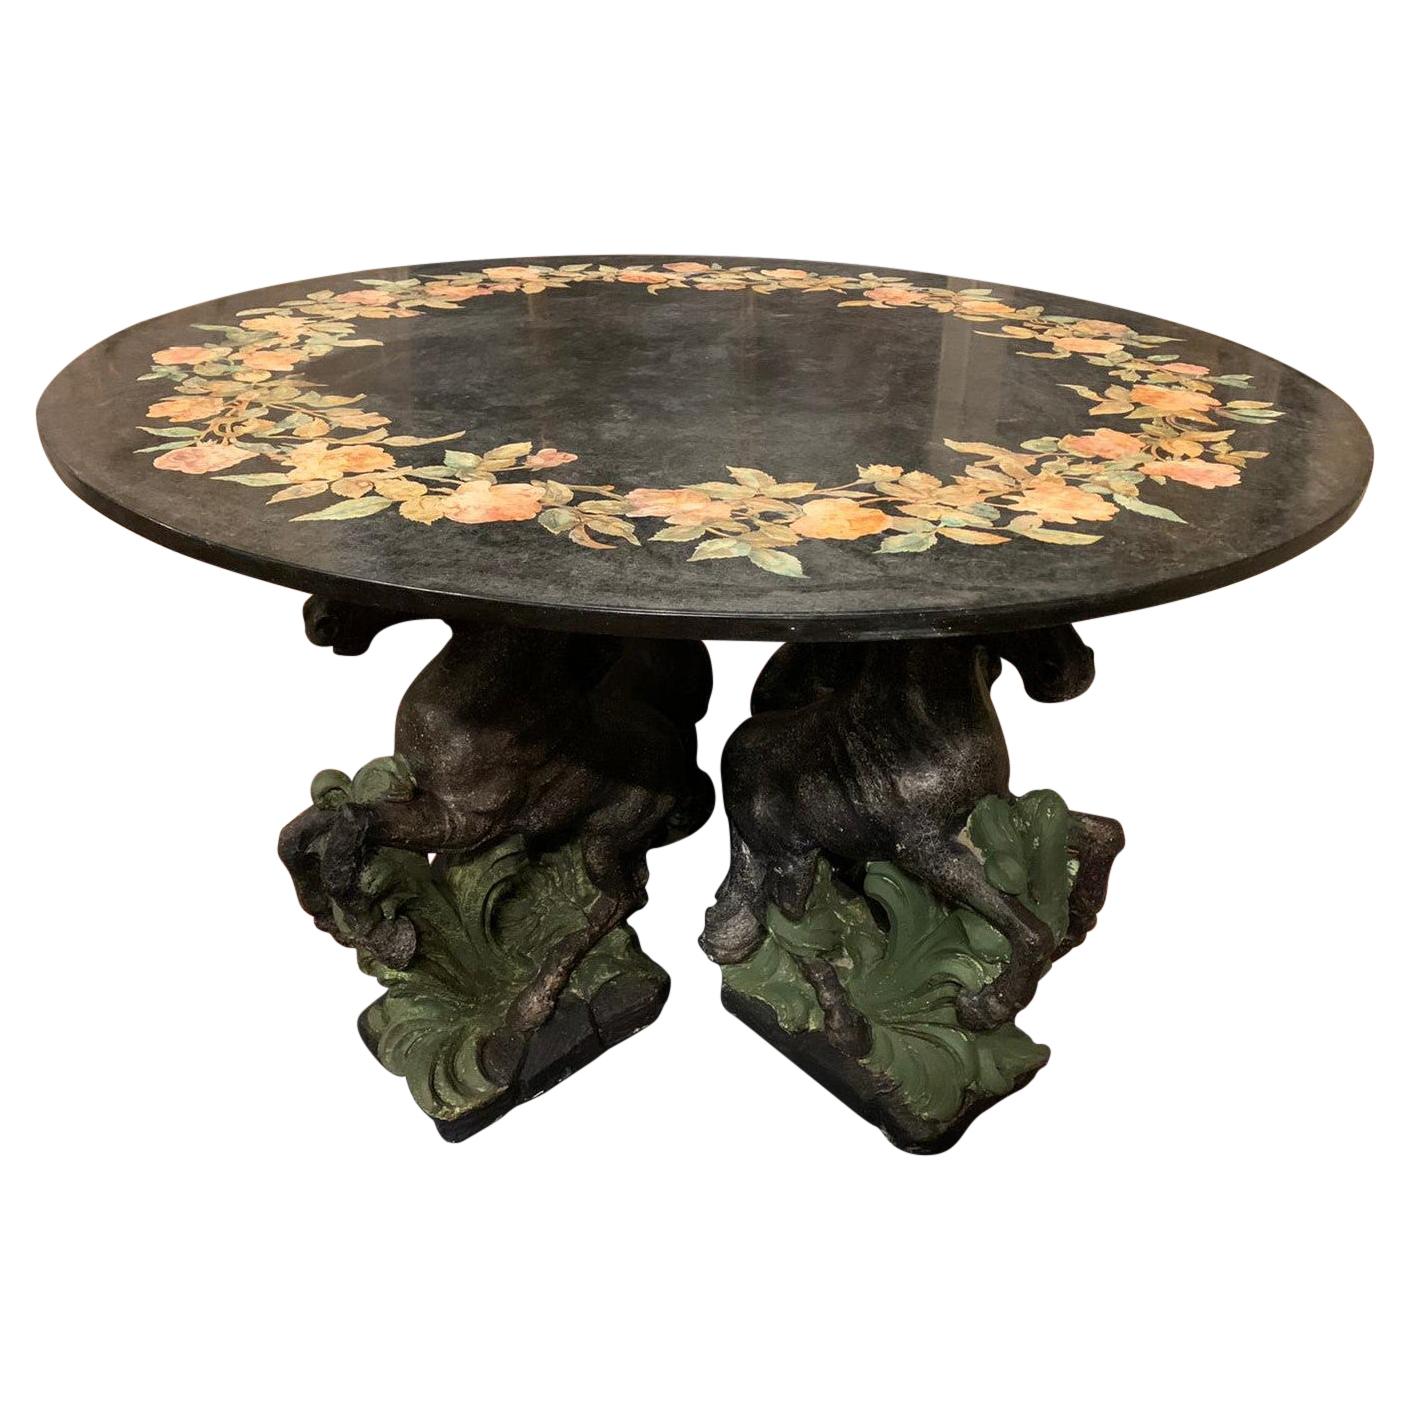 Vintage Black Scagliola Table with Four Sculpted Horses at the Base, '900 Italy For Sale